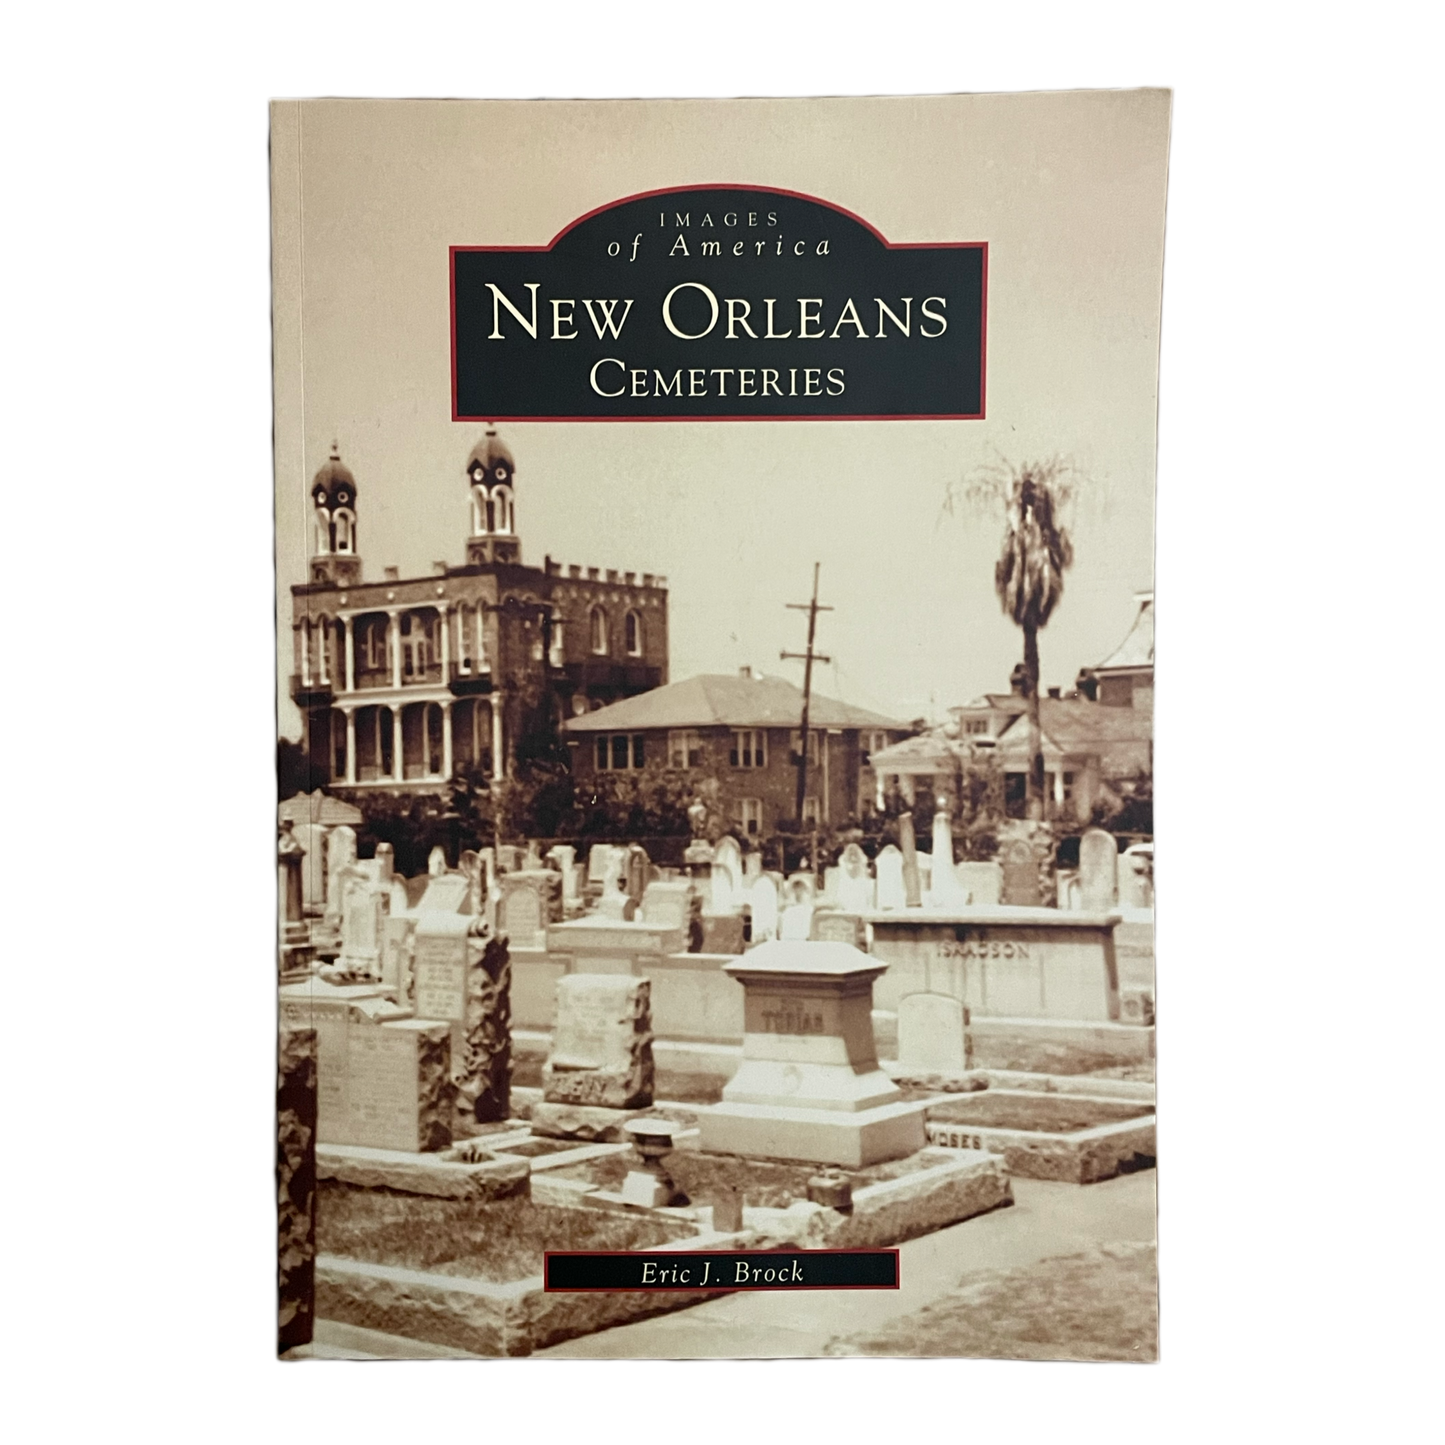 Images of America: New Orleans Cemeteries by Eric J. Brock